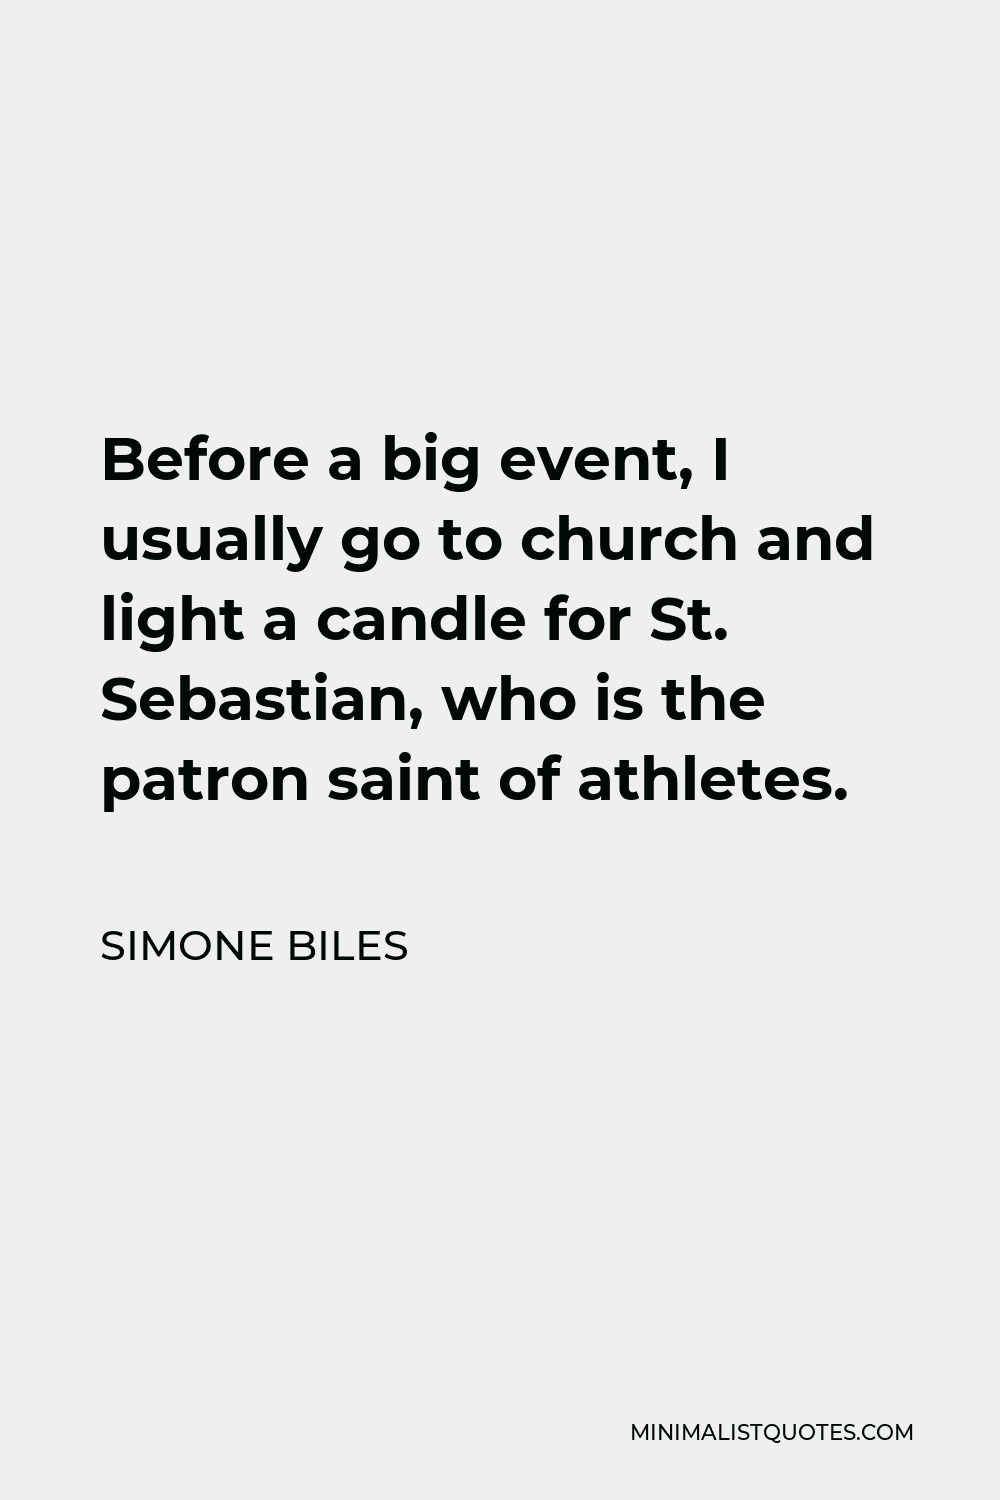 Simone Biles Quote - Before a big event, I usually go to church and light a candle for St. Sebastian, who is the patron saint of athletes.